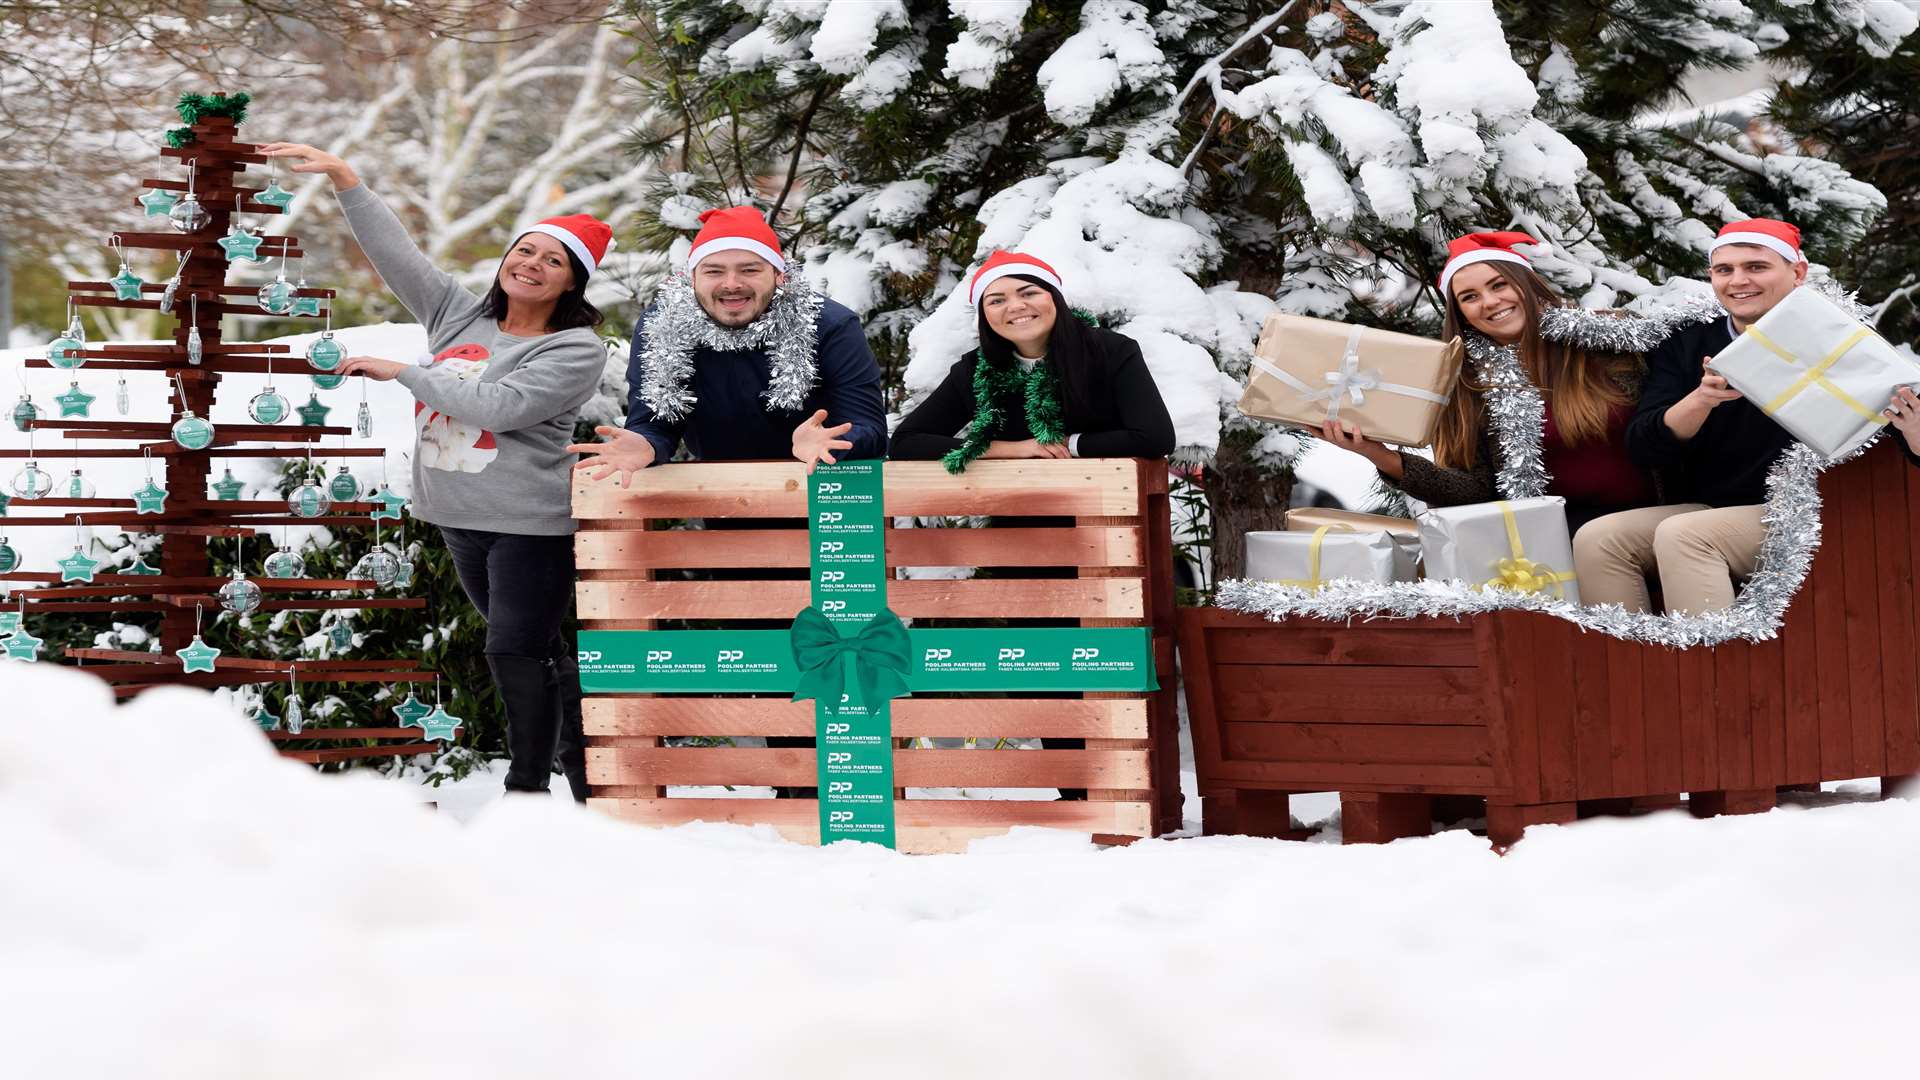 Nigel Chambers helped construct Santa's sleigh from used pallets. The work was commissioned by Pooling Partners who transport pallets across Europe.